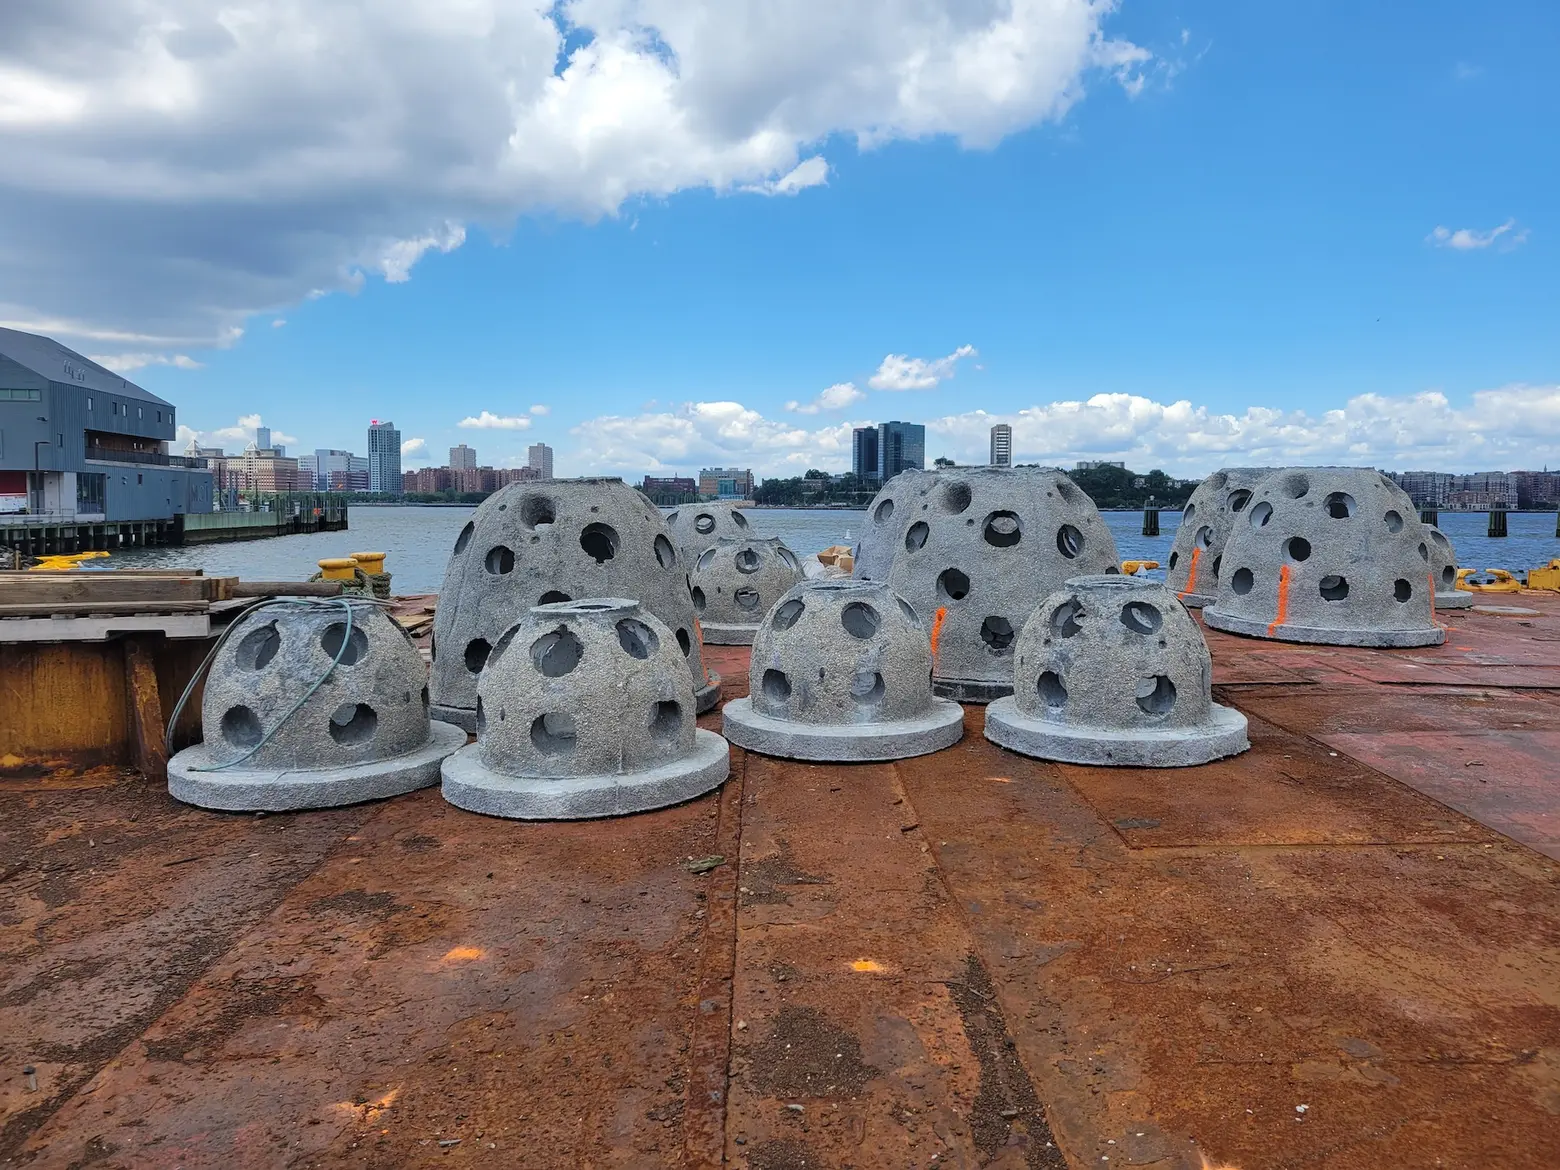 New underwater habitat with 20 million juvenile oysters deployed at NYC’s Gansevoort Peninsula